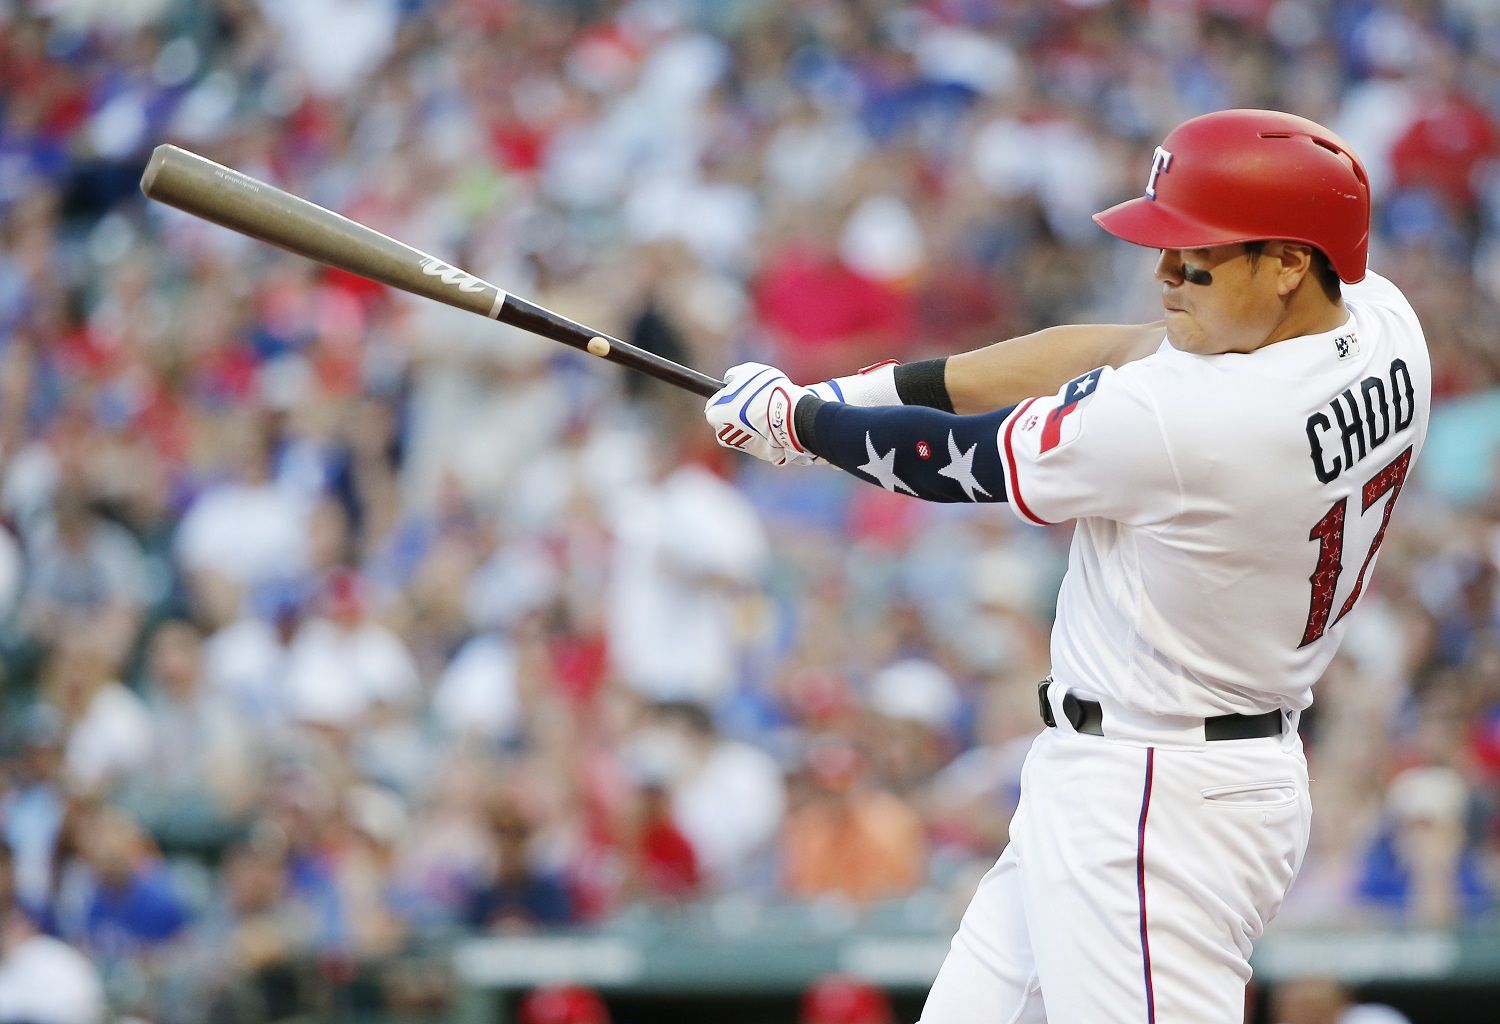 Texas Rangers' Shin-Soo Choo swings for a single during the fourth inning of the team's baseball game against the Houston Astros, Wednesday, July 4, 2018, in Arlington, Texas. Houston won 5-4 in t10 innings. (AP Photo/Brandon Wade)